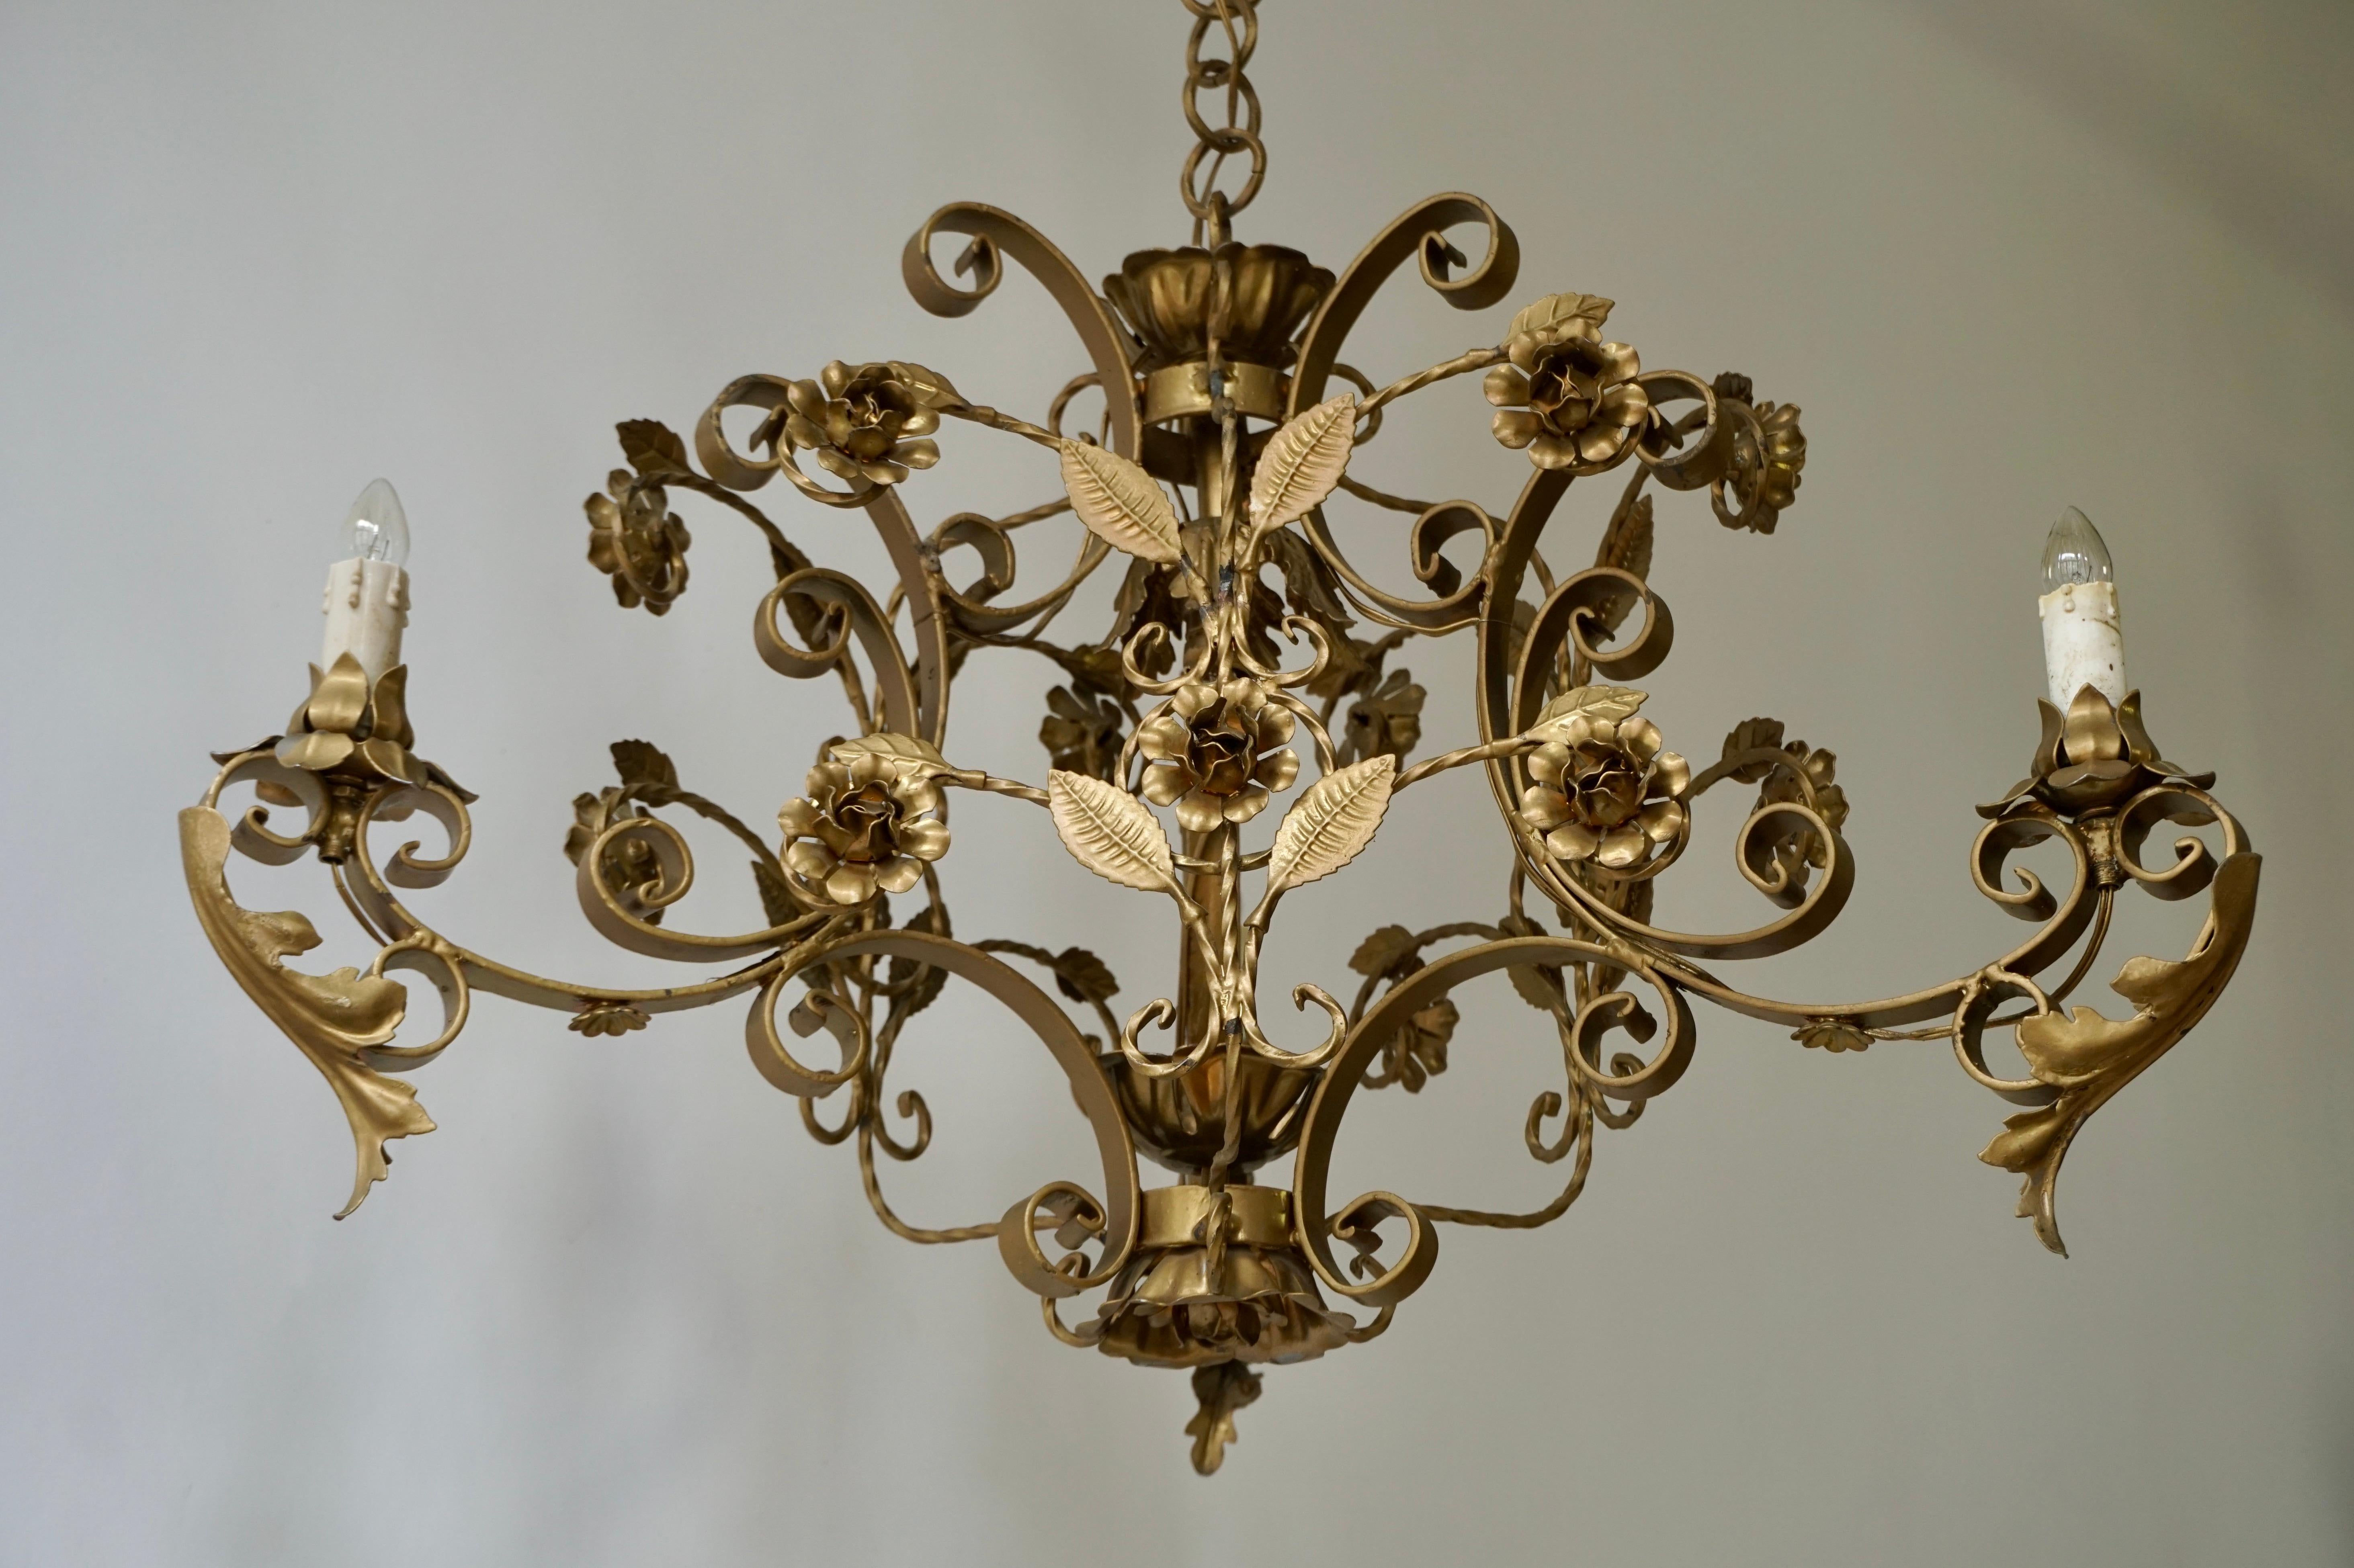 Italian chandelier.
The light requires four single E14 screw fit light bulbs (60Watt max.) LED compatible
Measures: Diameter 65 cm.
Height fixture 40 cm.
Total height including the chain and ceiling plate 95 cm.
weight 7 kg.